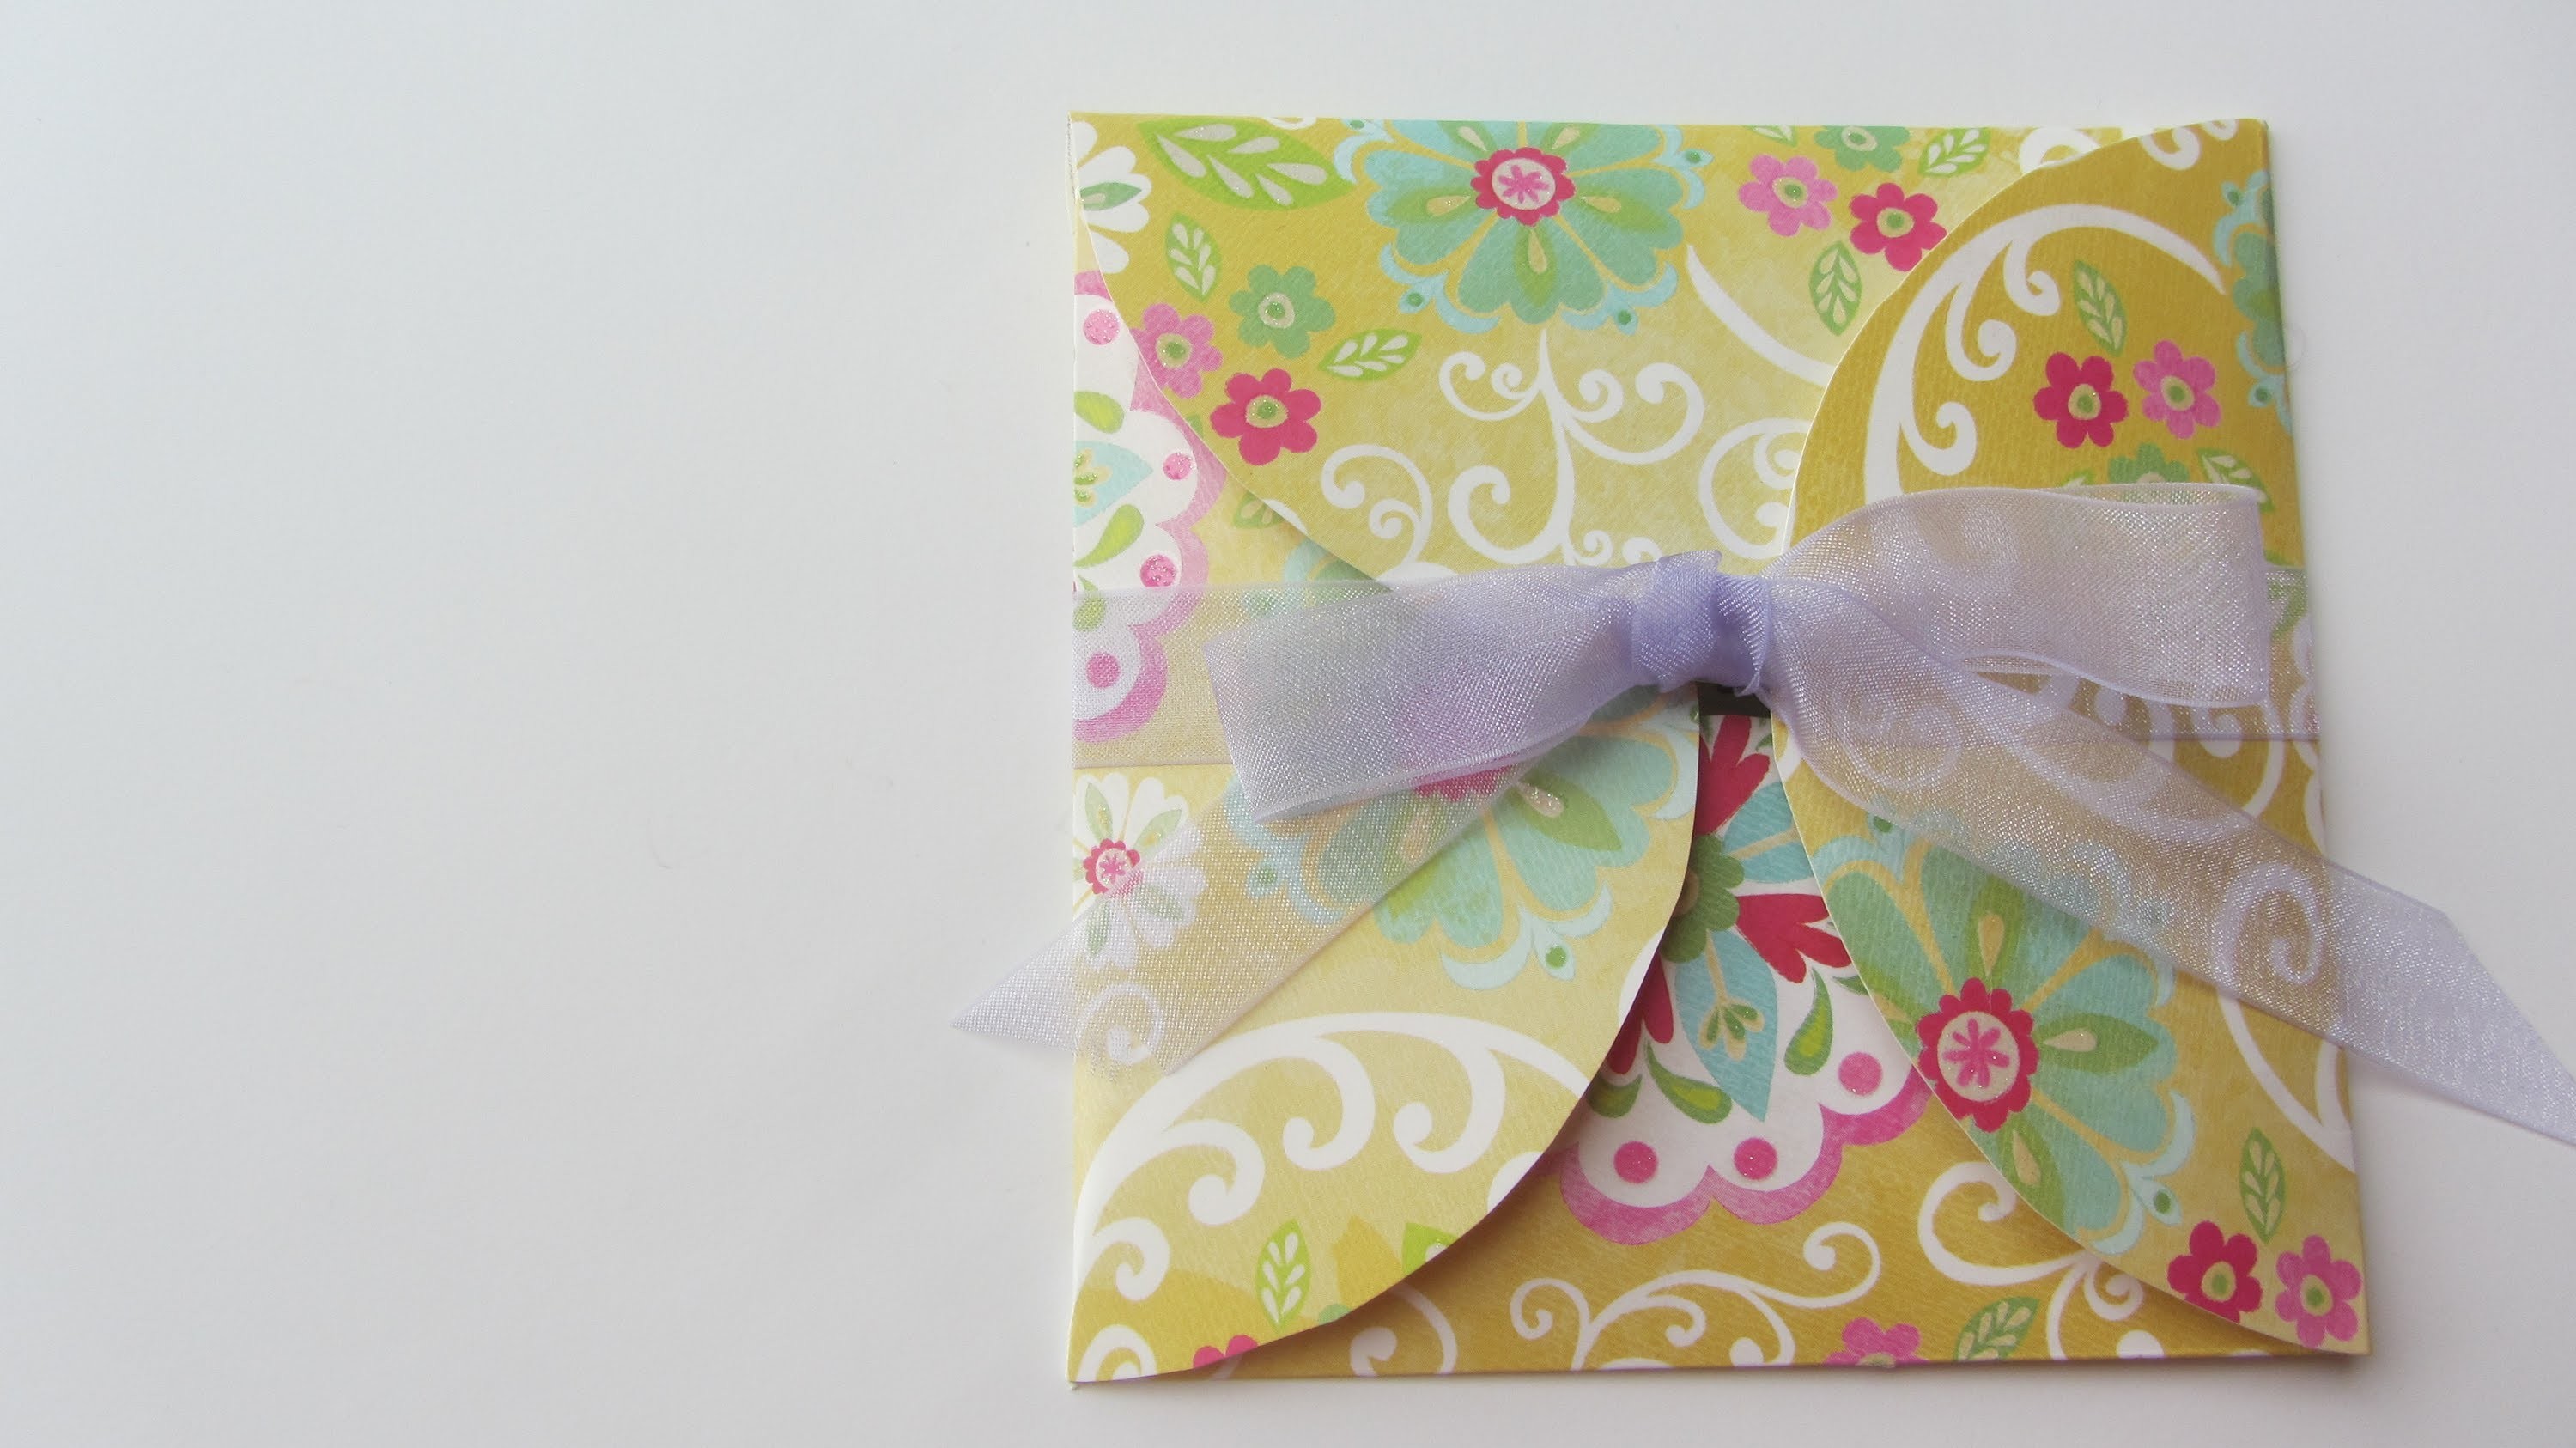 How to Make a Fun CD DVD Envelope With Scrapbook Paper and a CD as Pattern